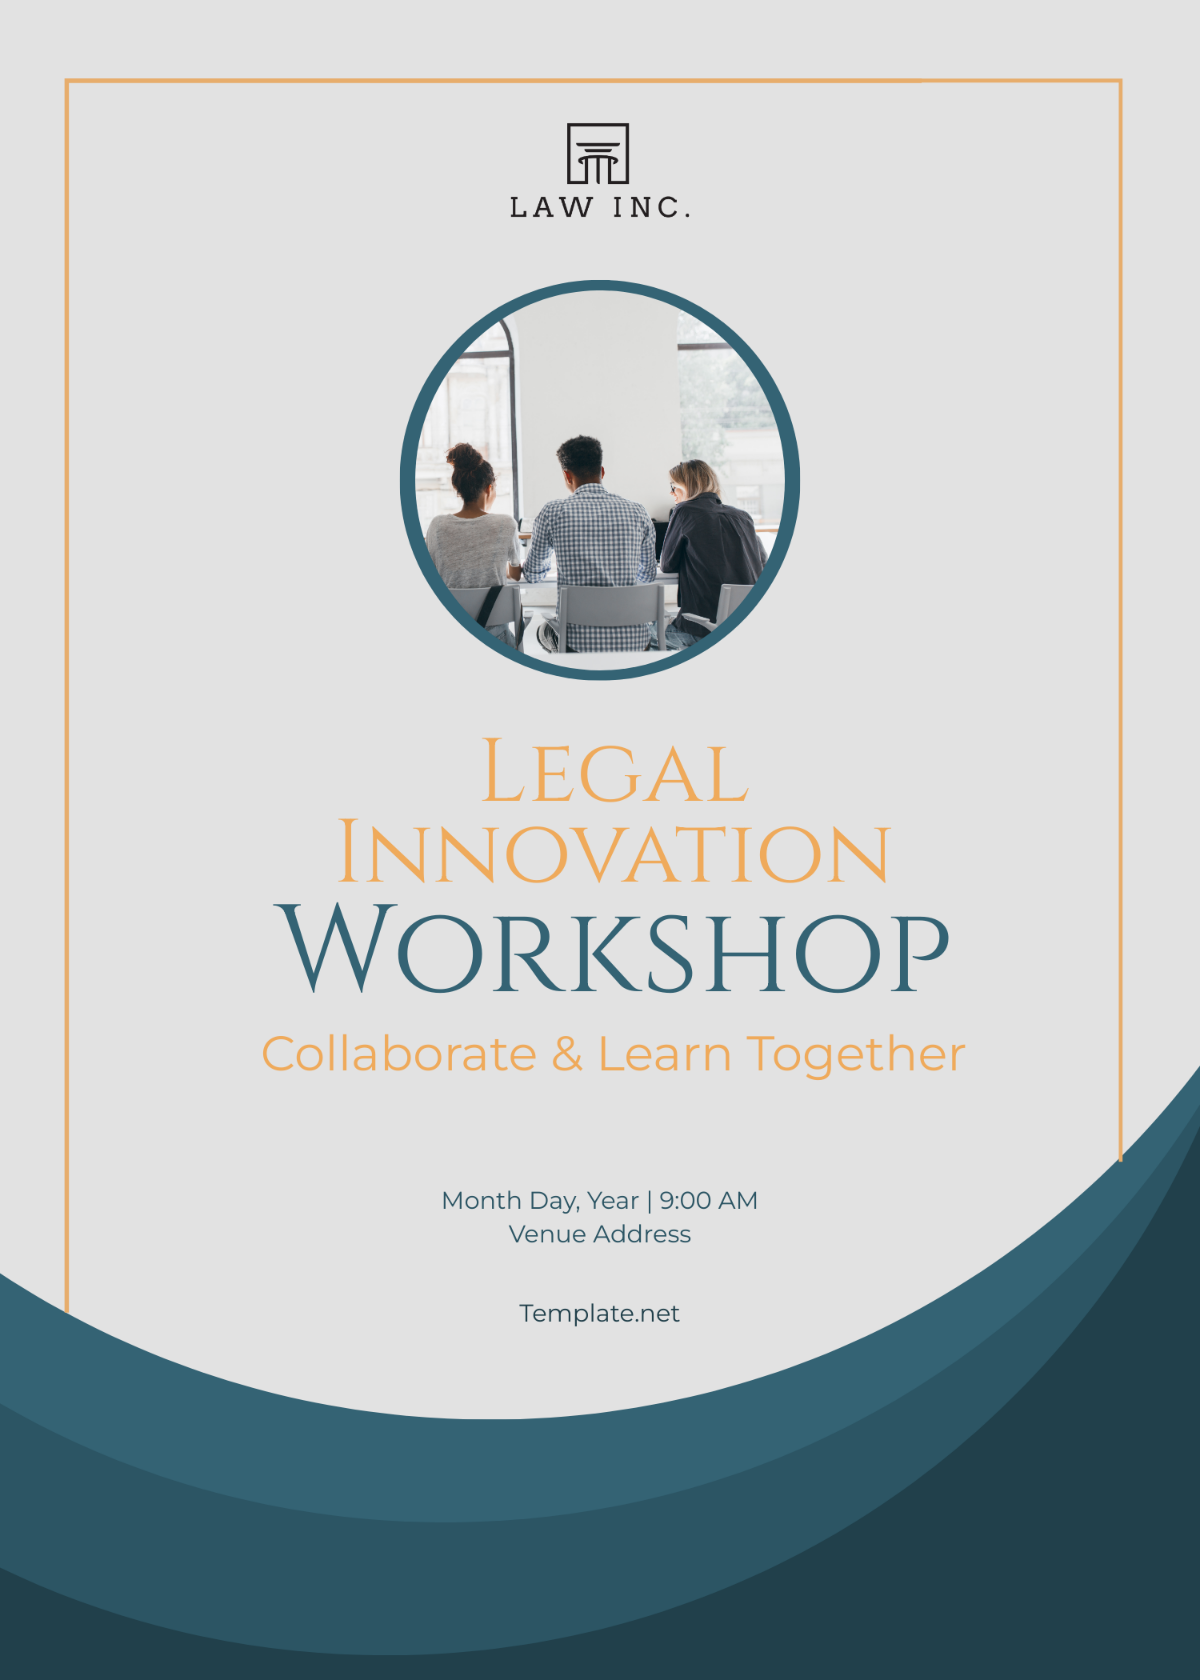 Law Firm Workshop Invitation Template